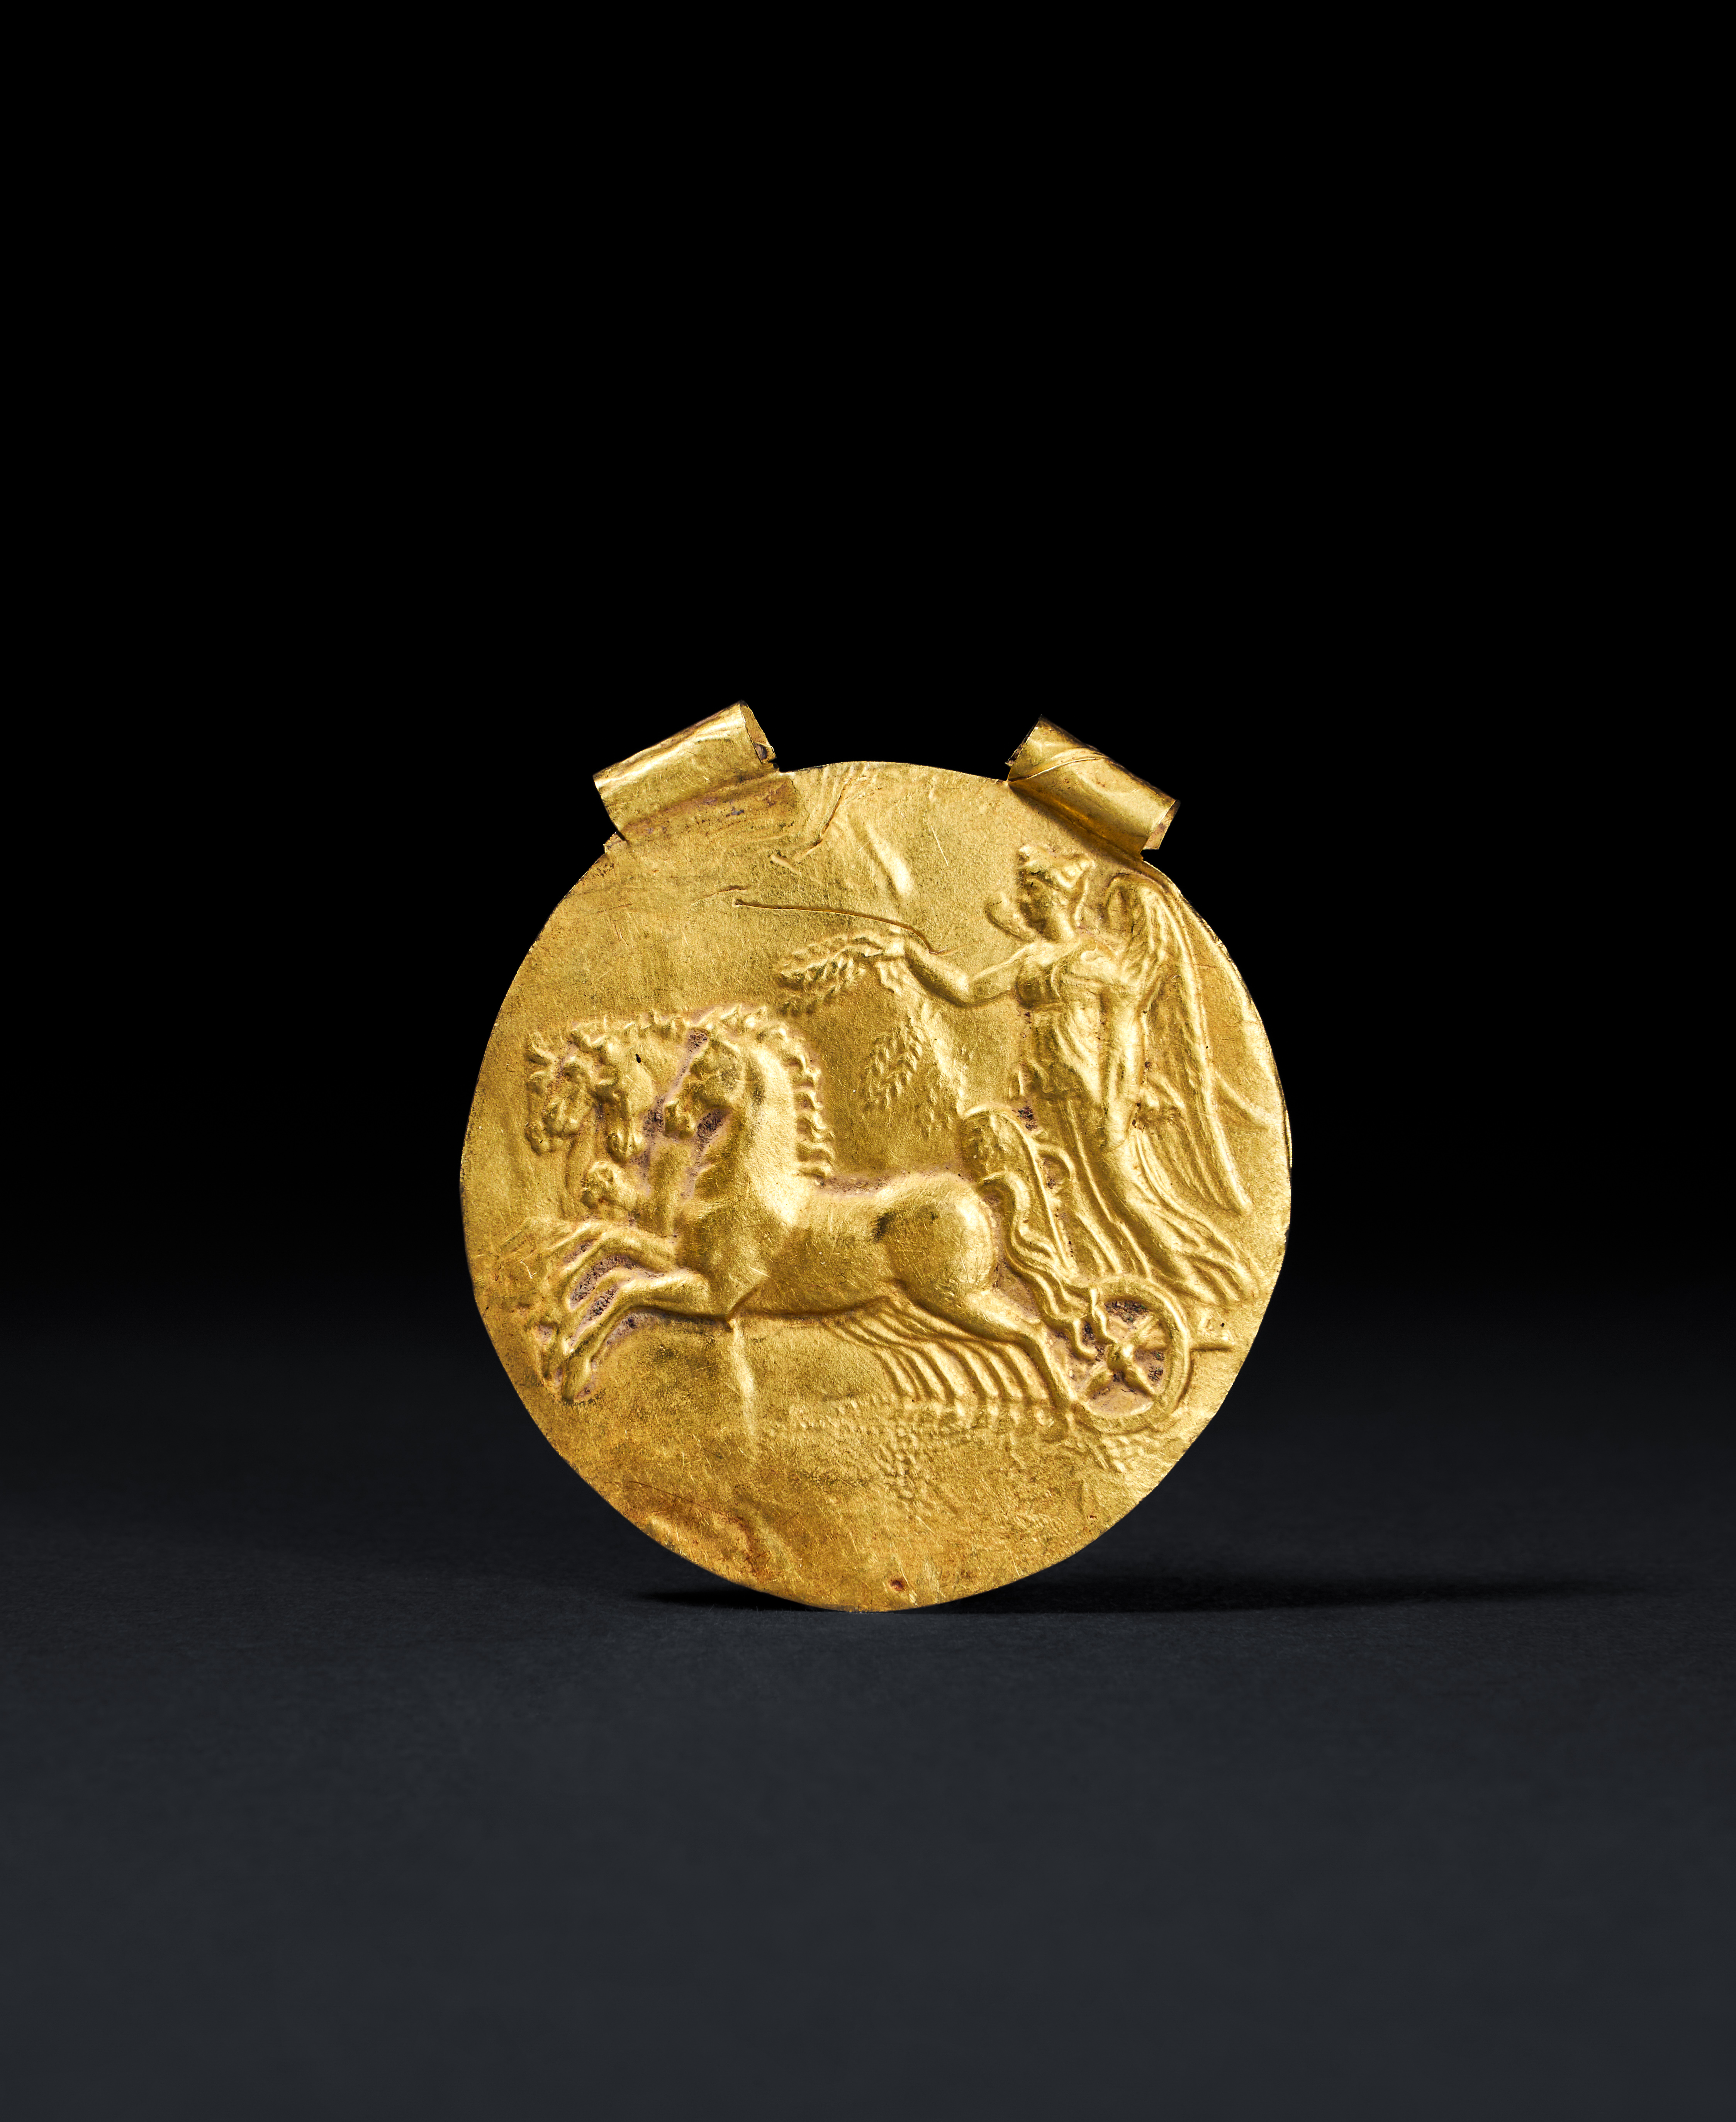 A HELLENISTIC GOLD APPLIQUE OF ATHENA CHARIOT RACING, HELLENISTIC PERIOD, CIRCA 3RD CENTURY B.C.